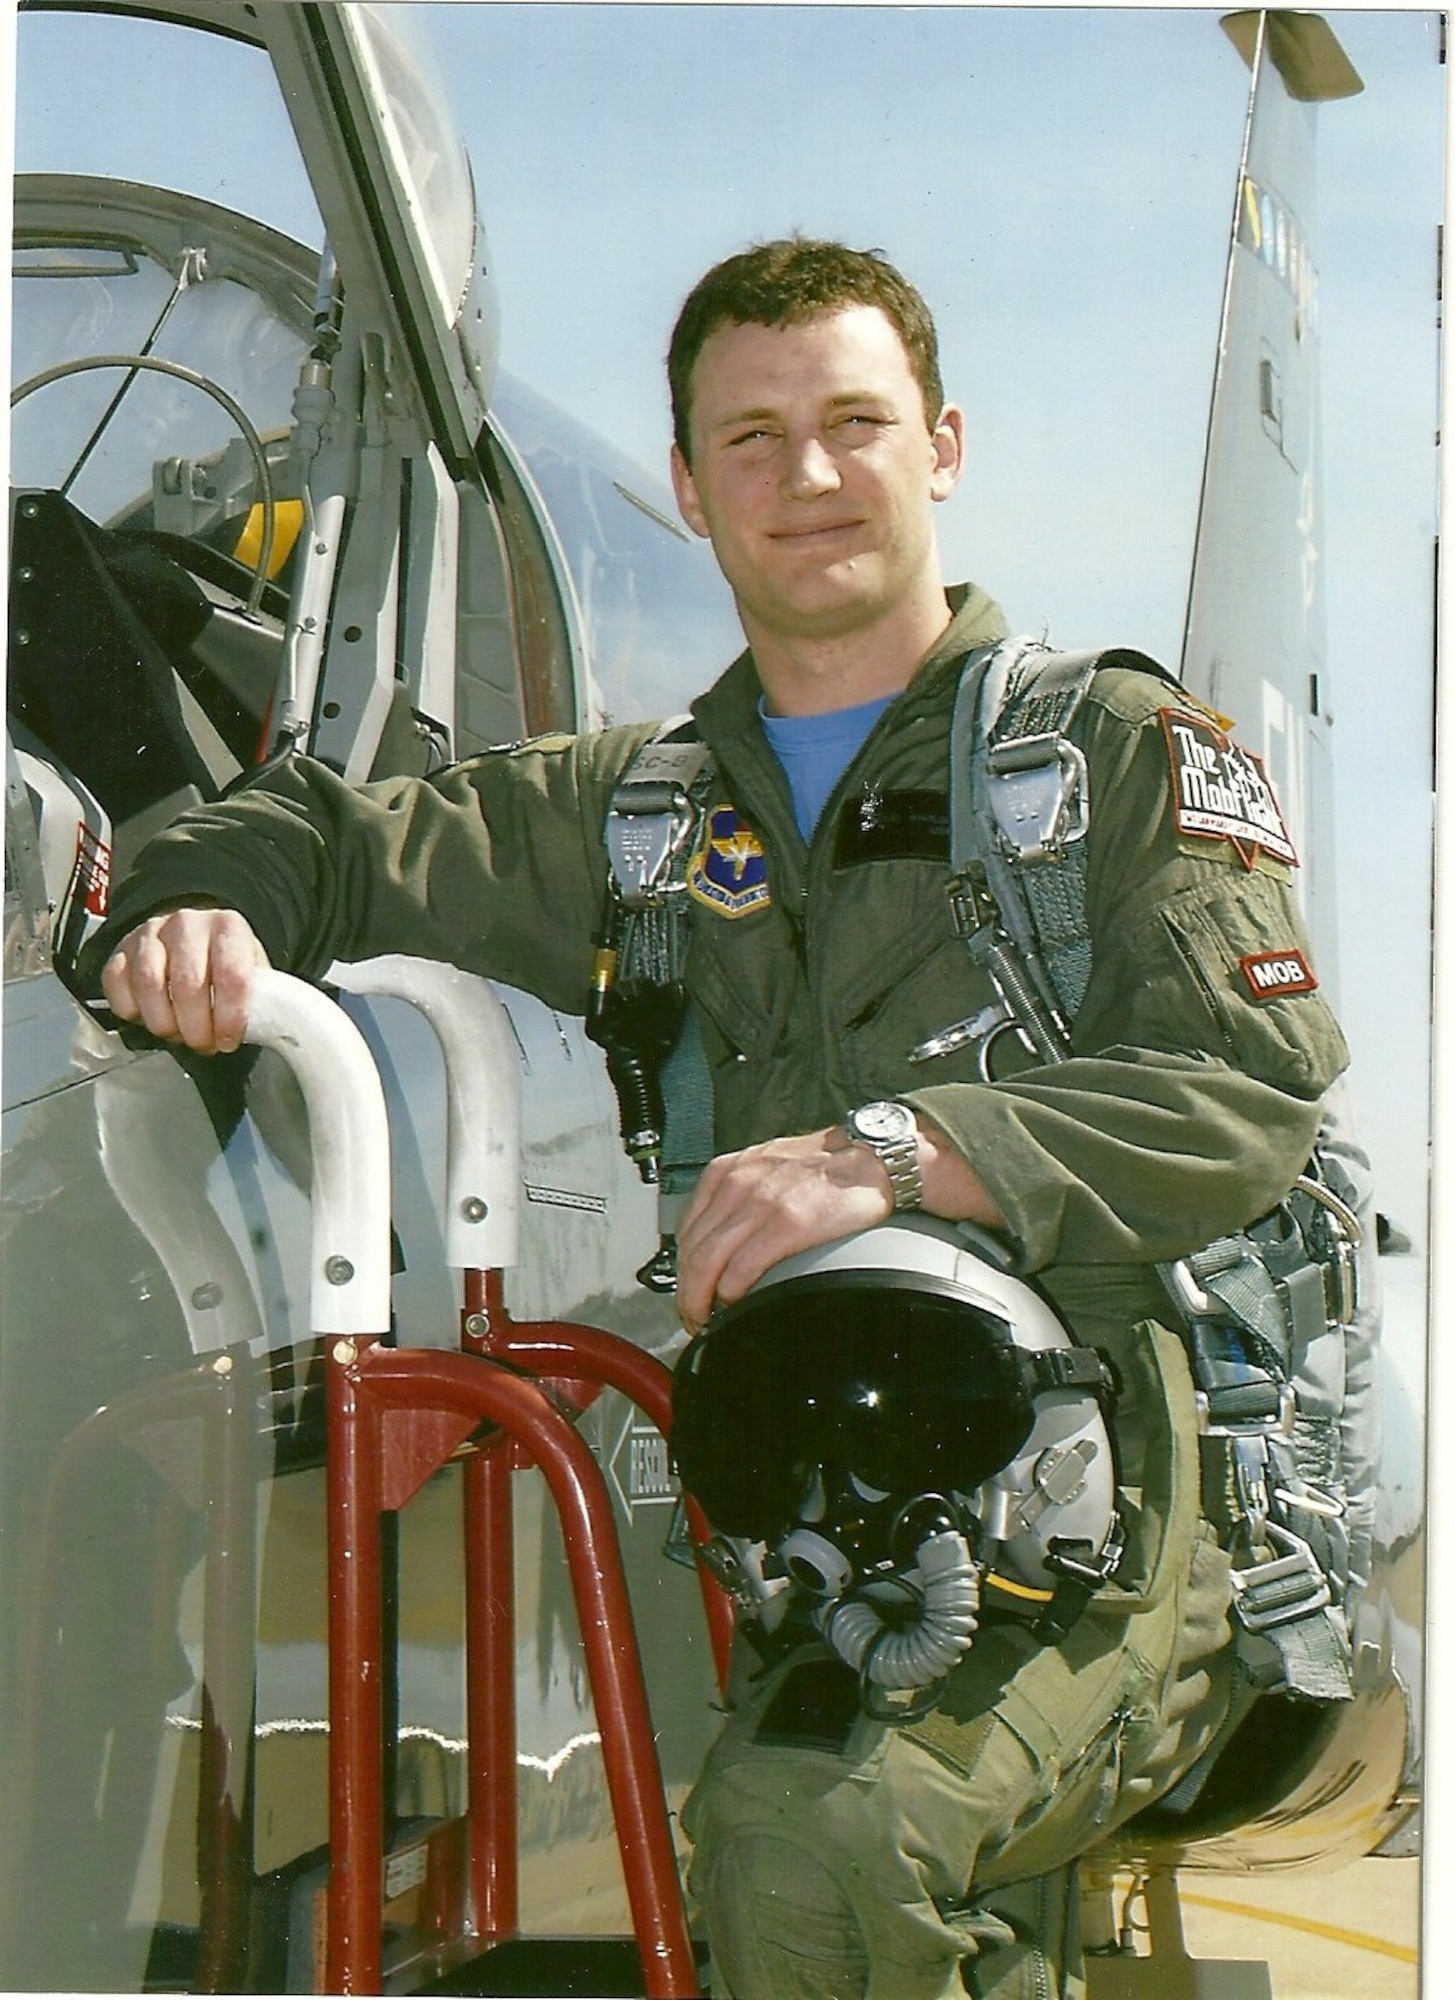 Capt. Nicholas S. Whitlock, 29, was a U-28A pilot and was on his fifth deployment. He entered the Air Force in 2006, receiving his commission through the Officer Training School. He had been assigned to the 319th Special Operations Squadron and then to the 34th SOS at Hurlburt Field since 2008 and had more than 800 combat flight hours. Whitlock died Feb. 18 when his U-28A was involved in an accident near Camp Lemonnier, Djibouti, located in the Horn of Africa. (Courtesy photo)